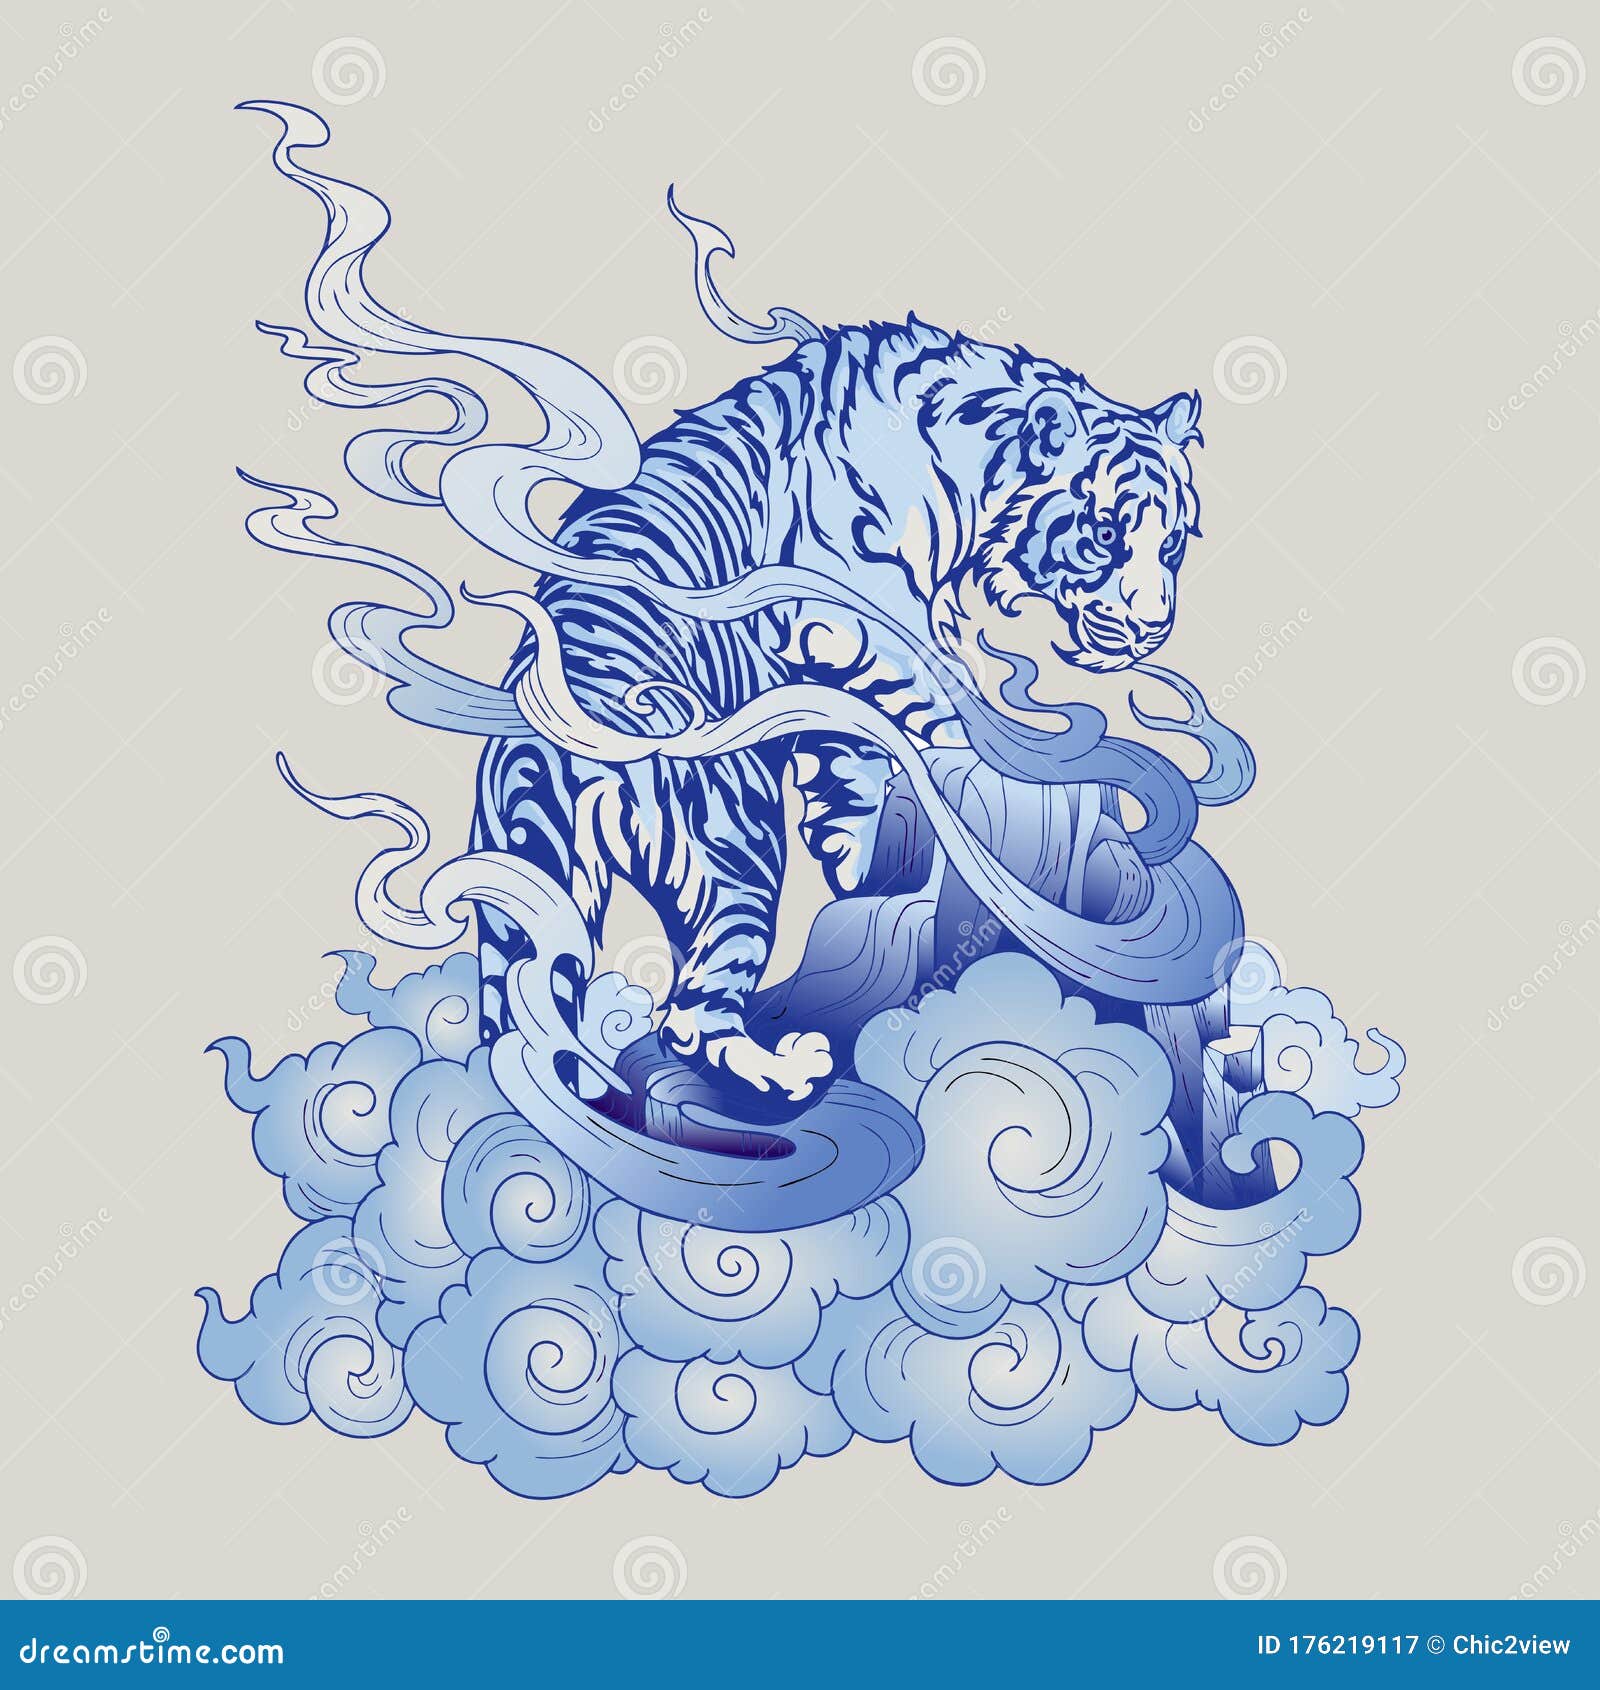 Tiger Oriental Japanese or Chinese Illustration Doodle in Tattoo Style with  Blue Porcelain Tone Stock Illustration - Illustration of gray, jungle:  176219117